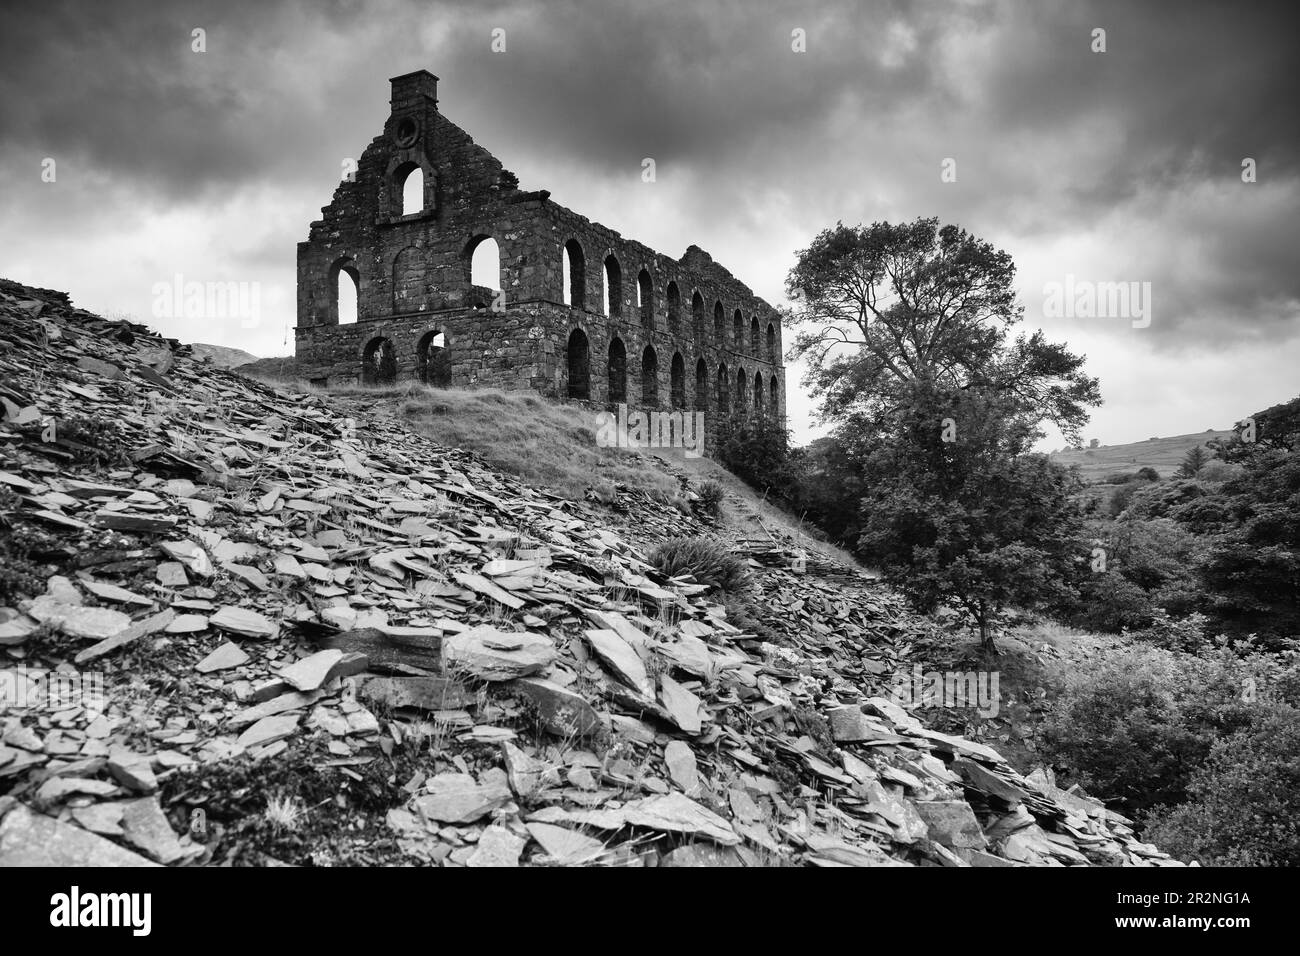 Ruin of an old slate mill, black and white, County Gwynedd, Wales, UK Stock Photo